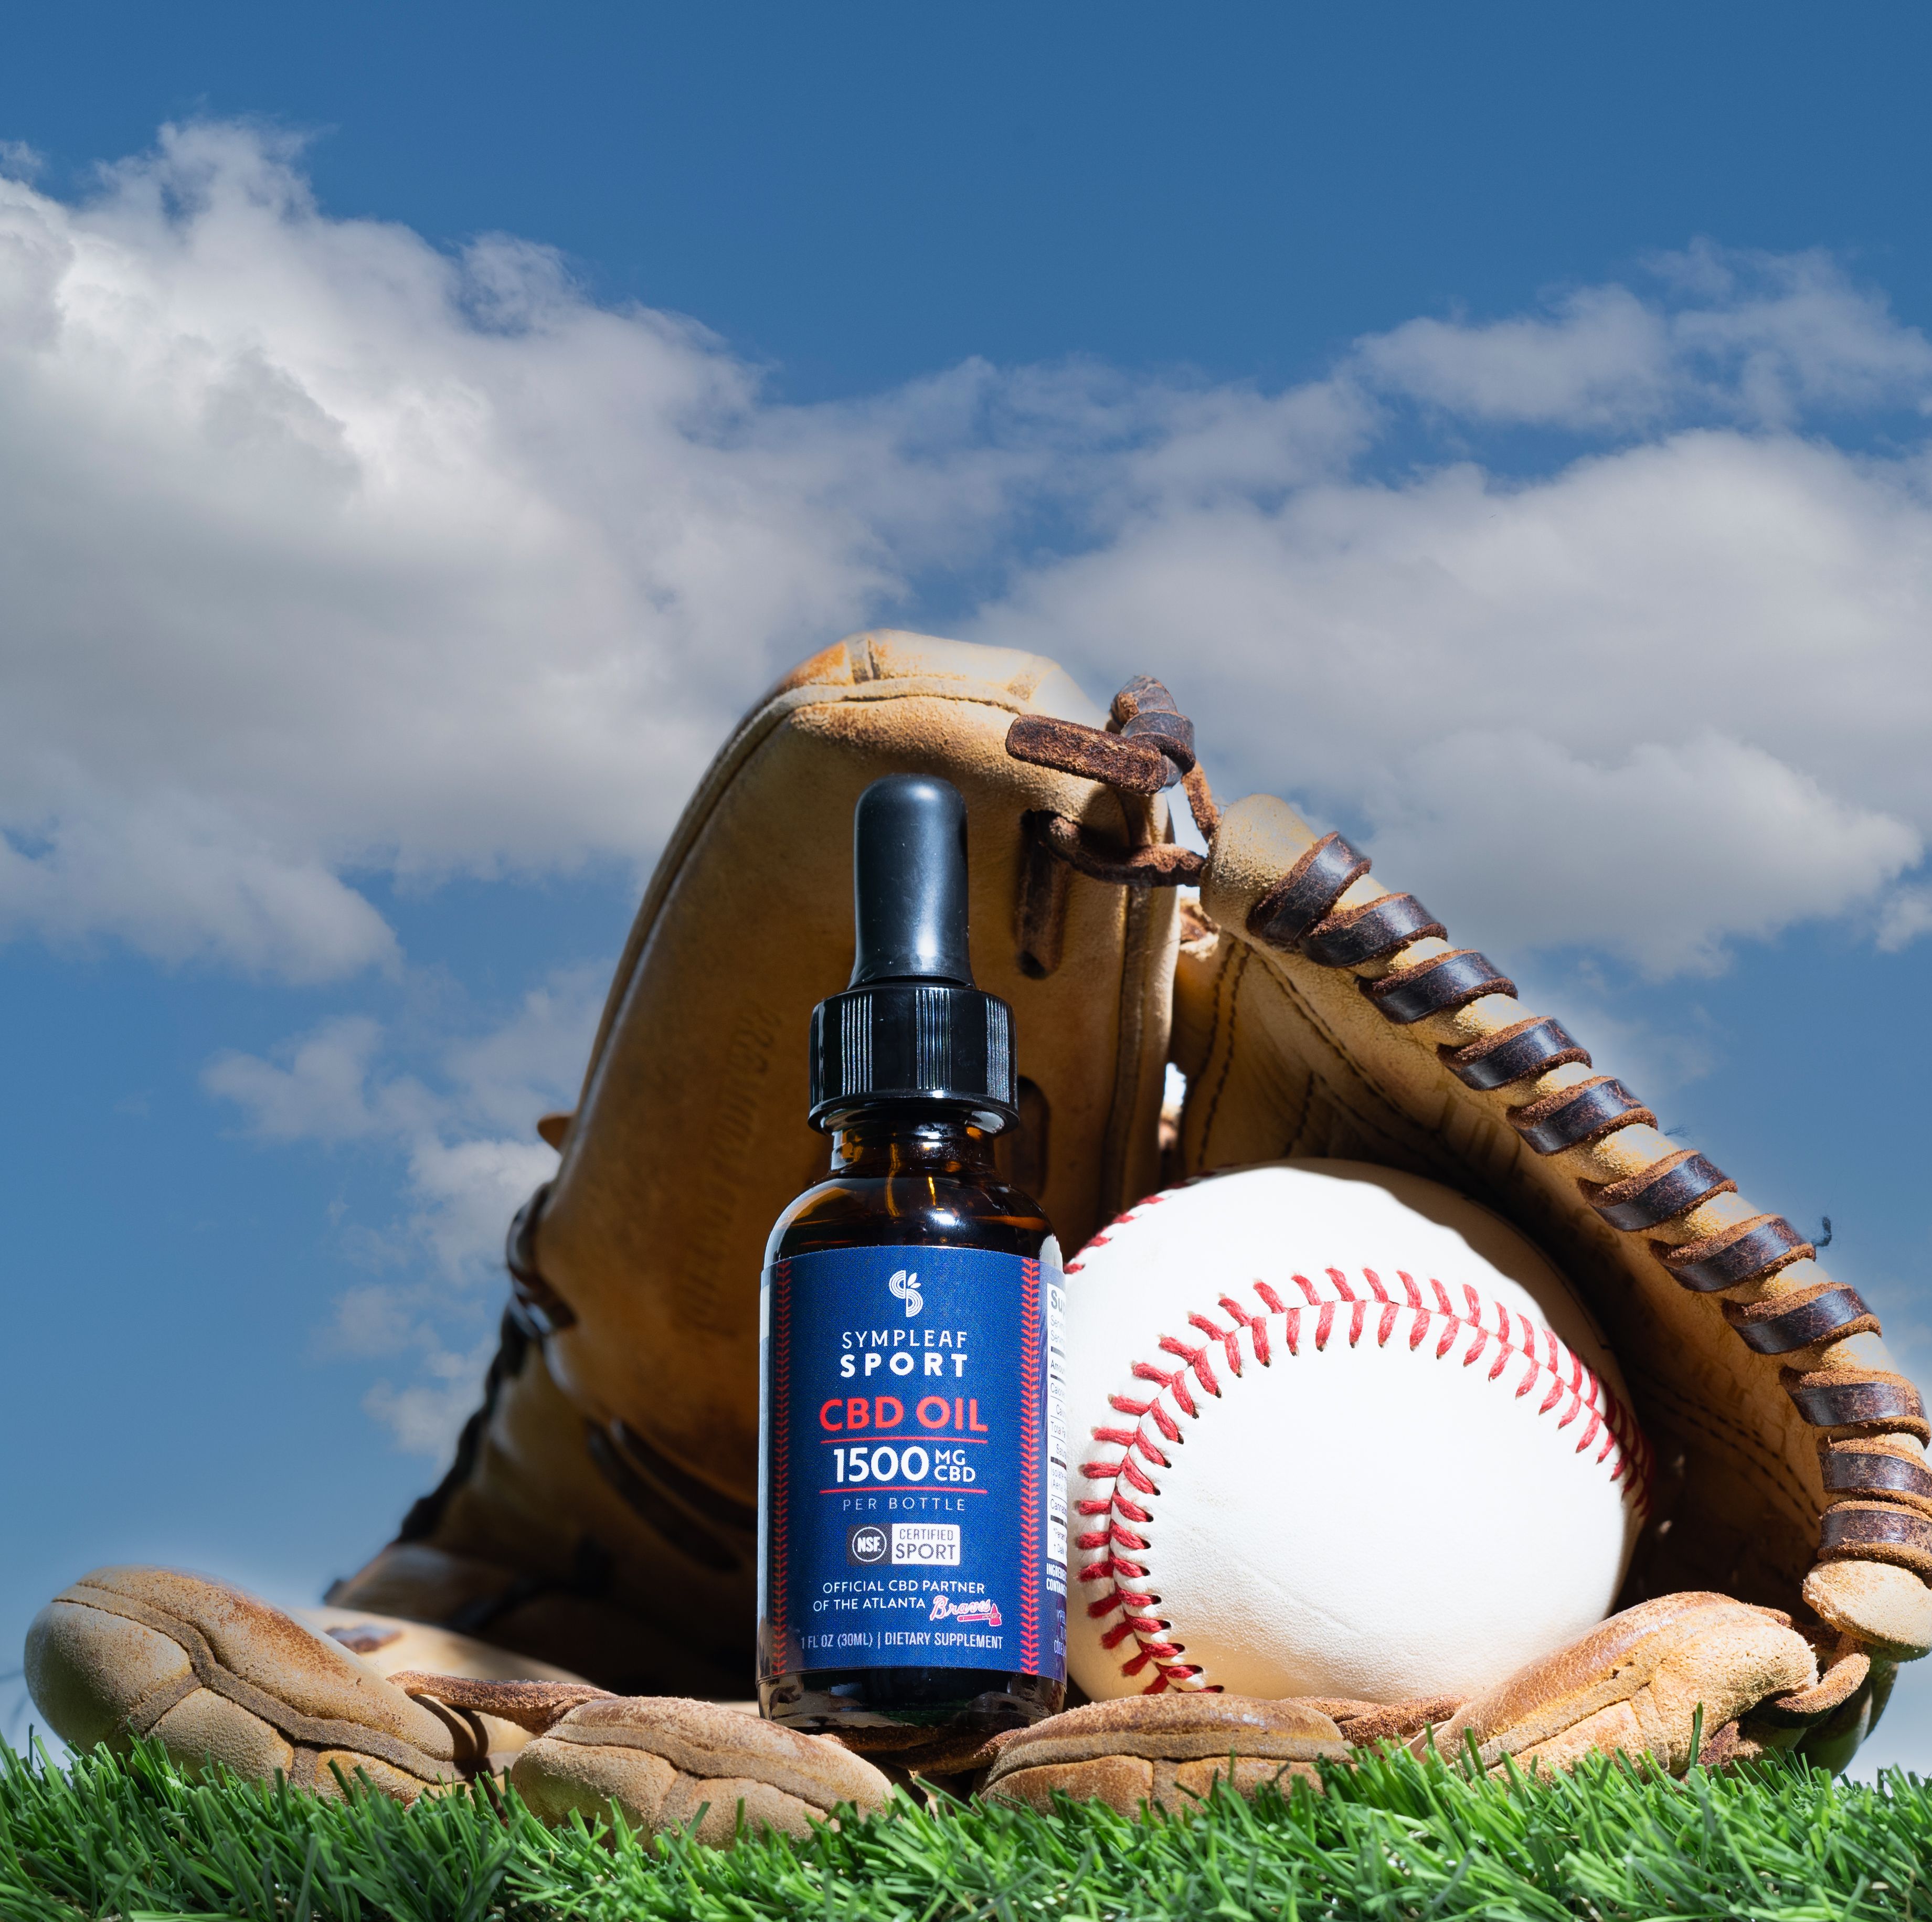 SYMPLEAF SPORT ANNOUNCED AS THE OFFICIAL CBD PARTNER OF THE ATLANTA BRAVES